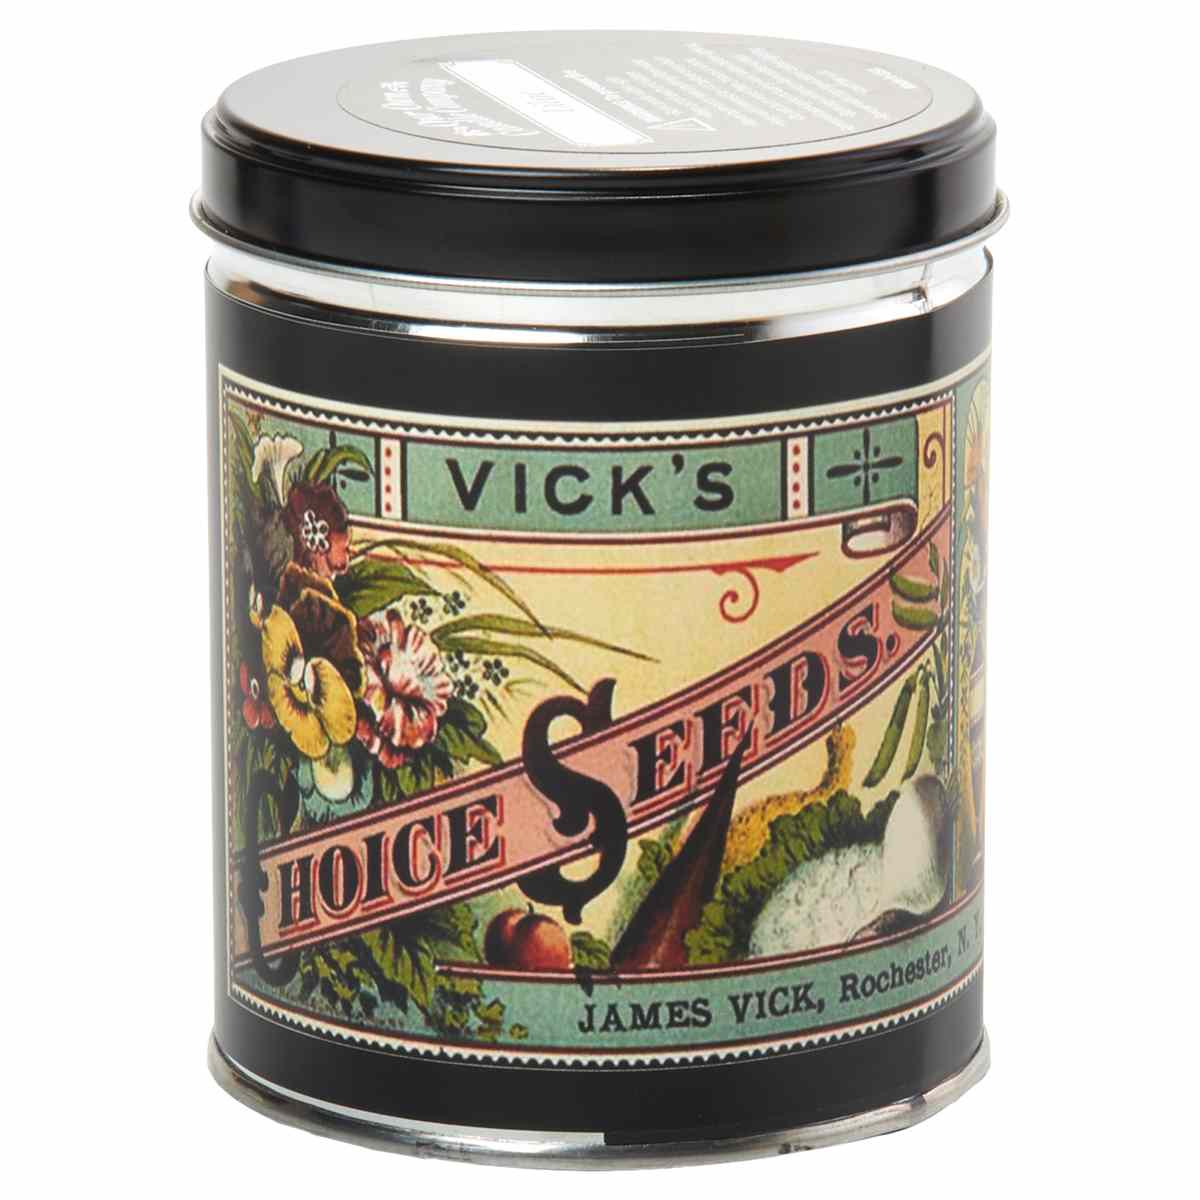 Our Own Candle Co. Vick's Choice Seeds 13oz. Tin Jar Candle